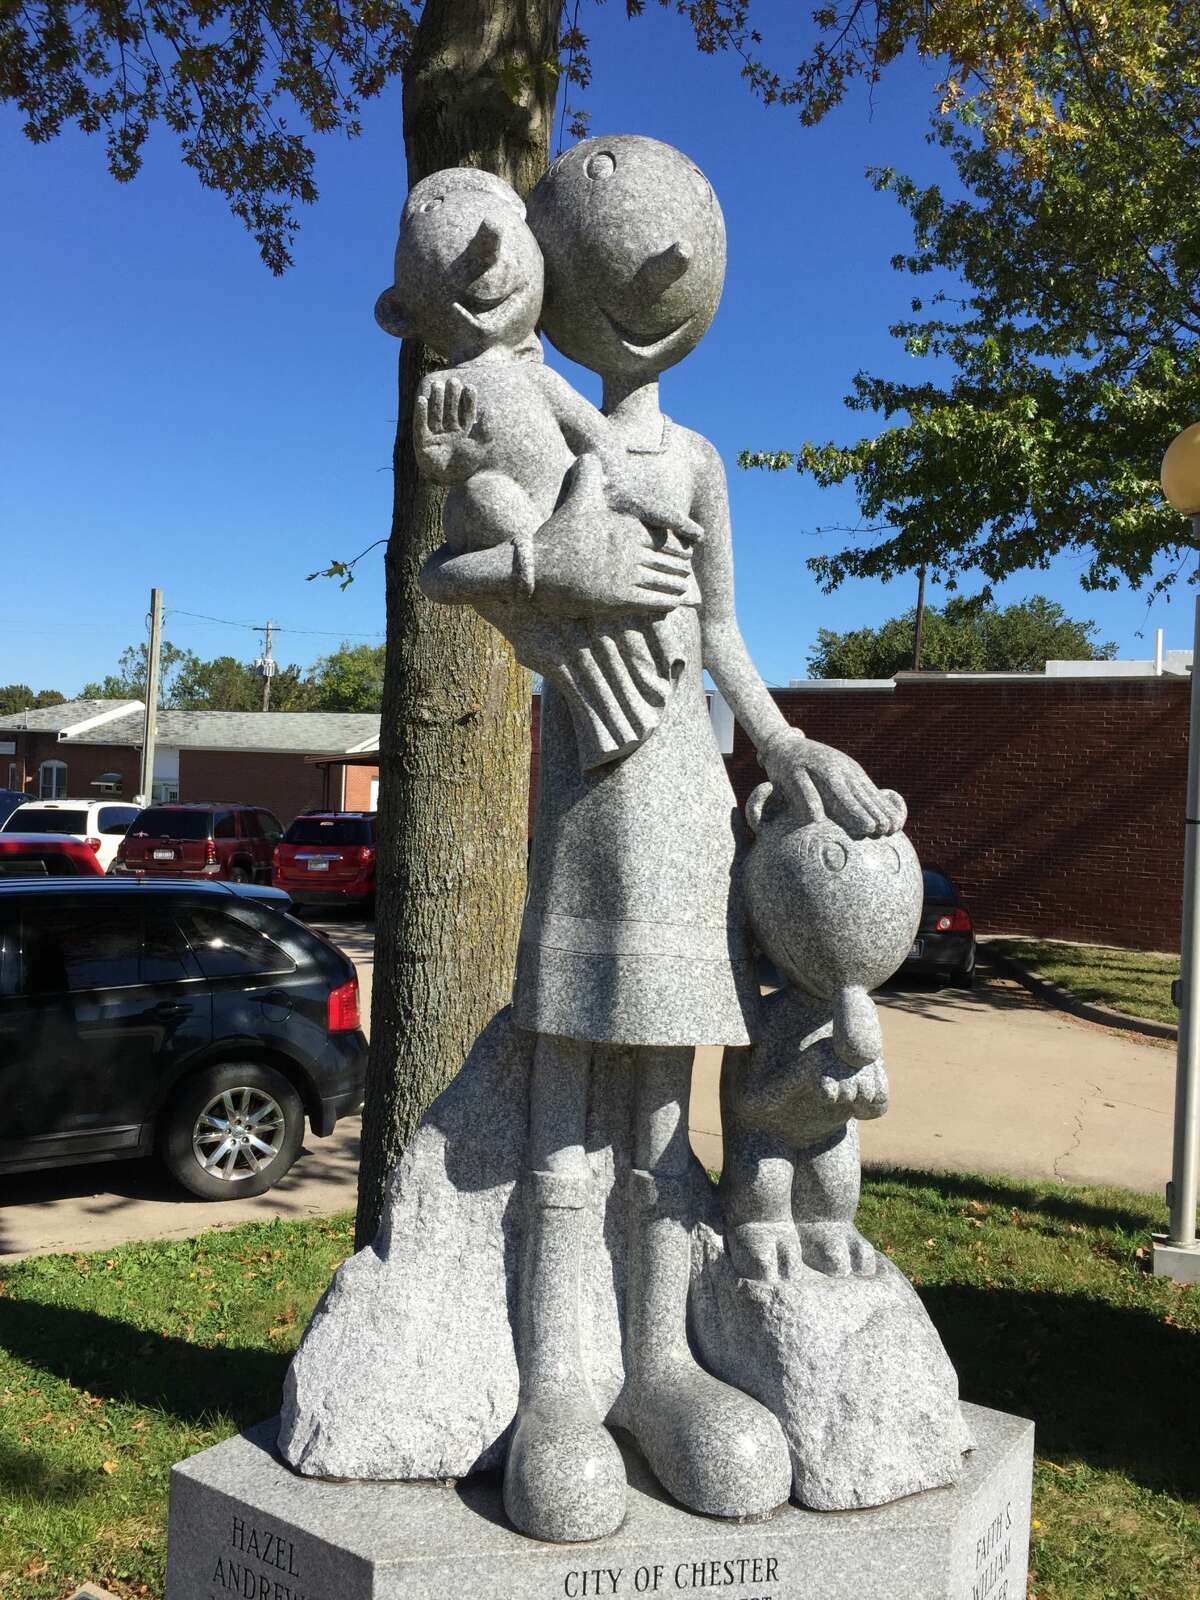 Popeye and friends live in small Illinois town